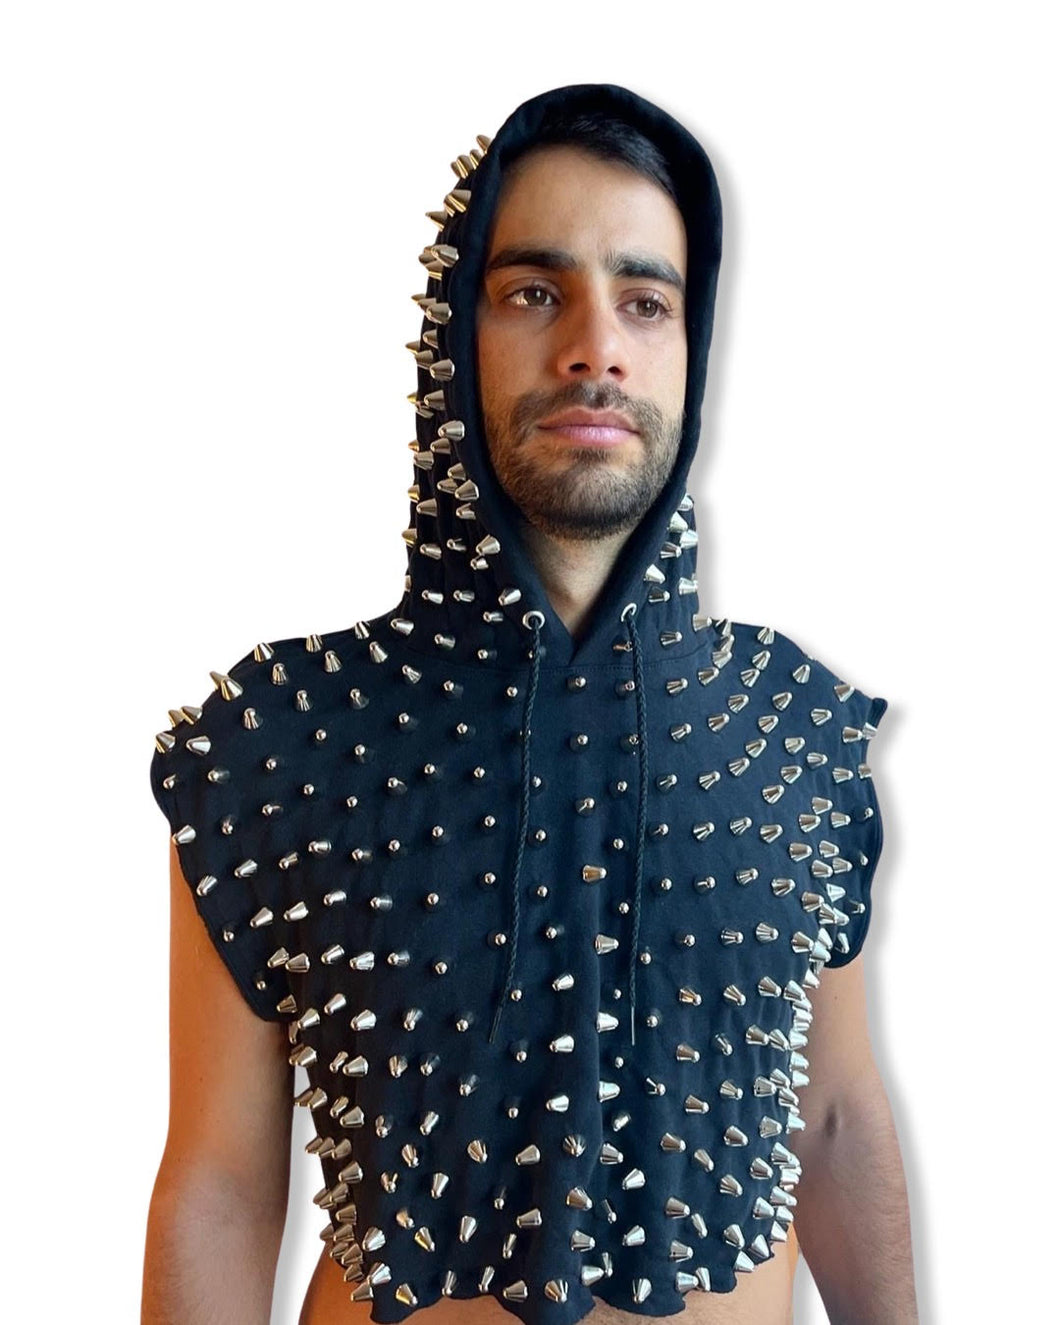 Studmuffin NYC Spike Crop Top Hoodie - More Colors